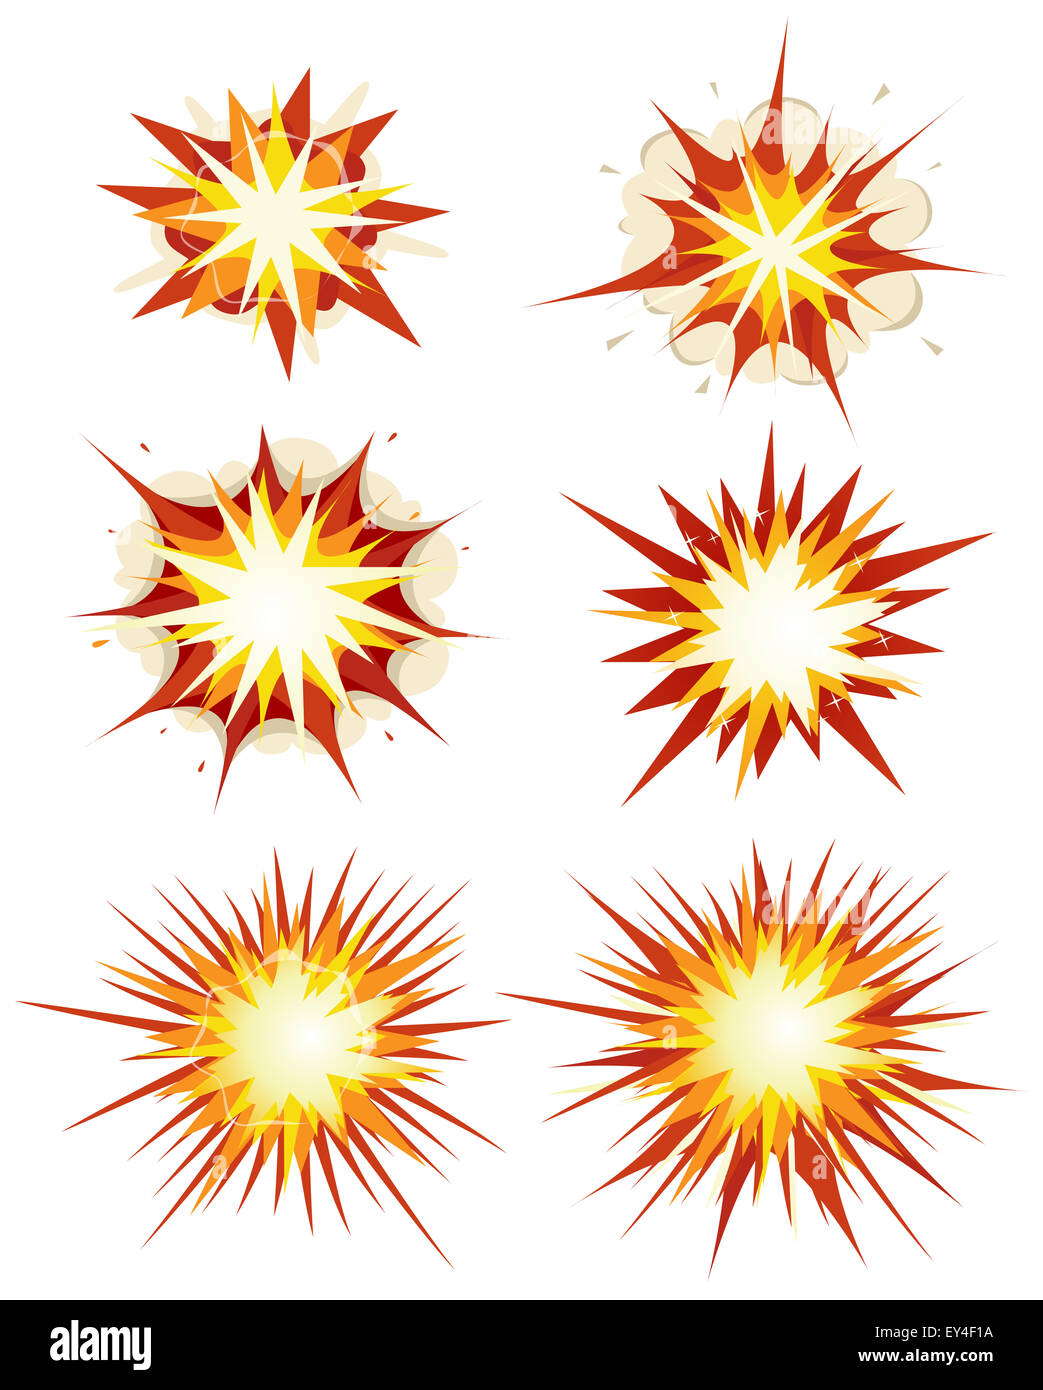 Illustration of a set of comic book explosion, blast and other cartoon fire bomb, star bursting, bang and exploding symbols Stock Photo